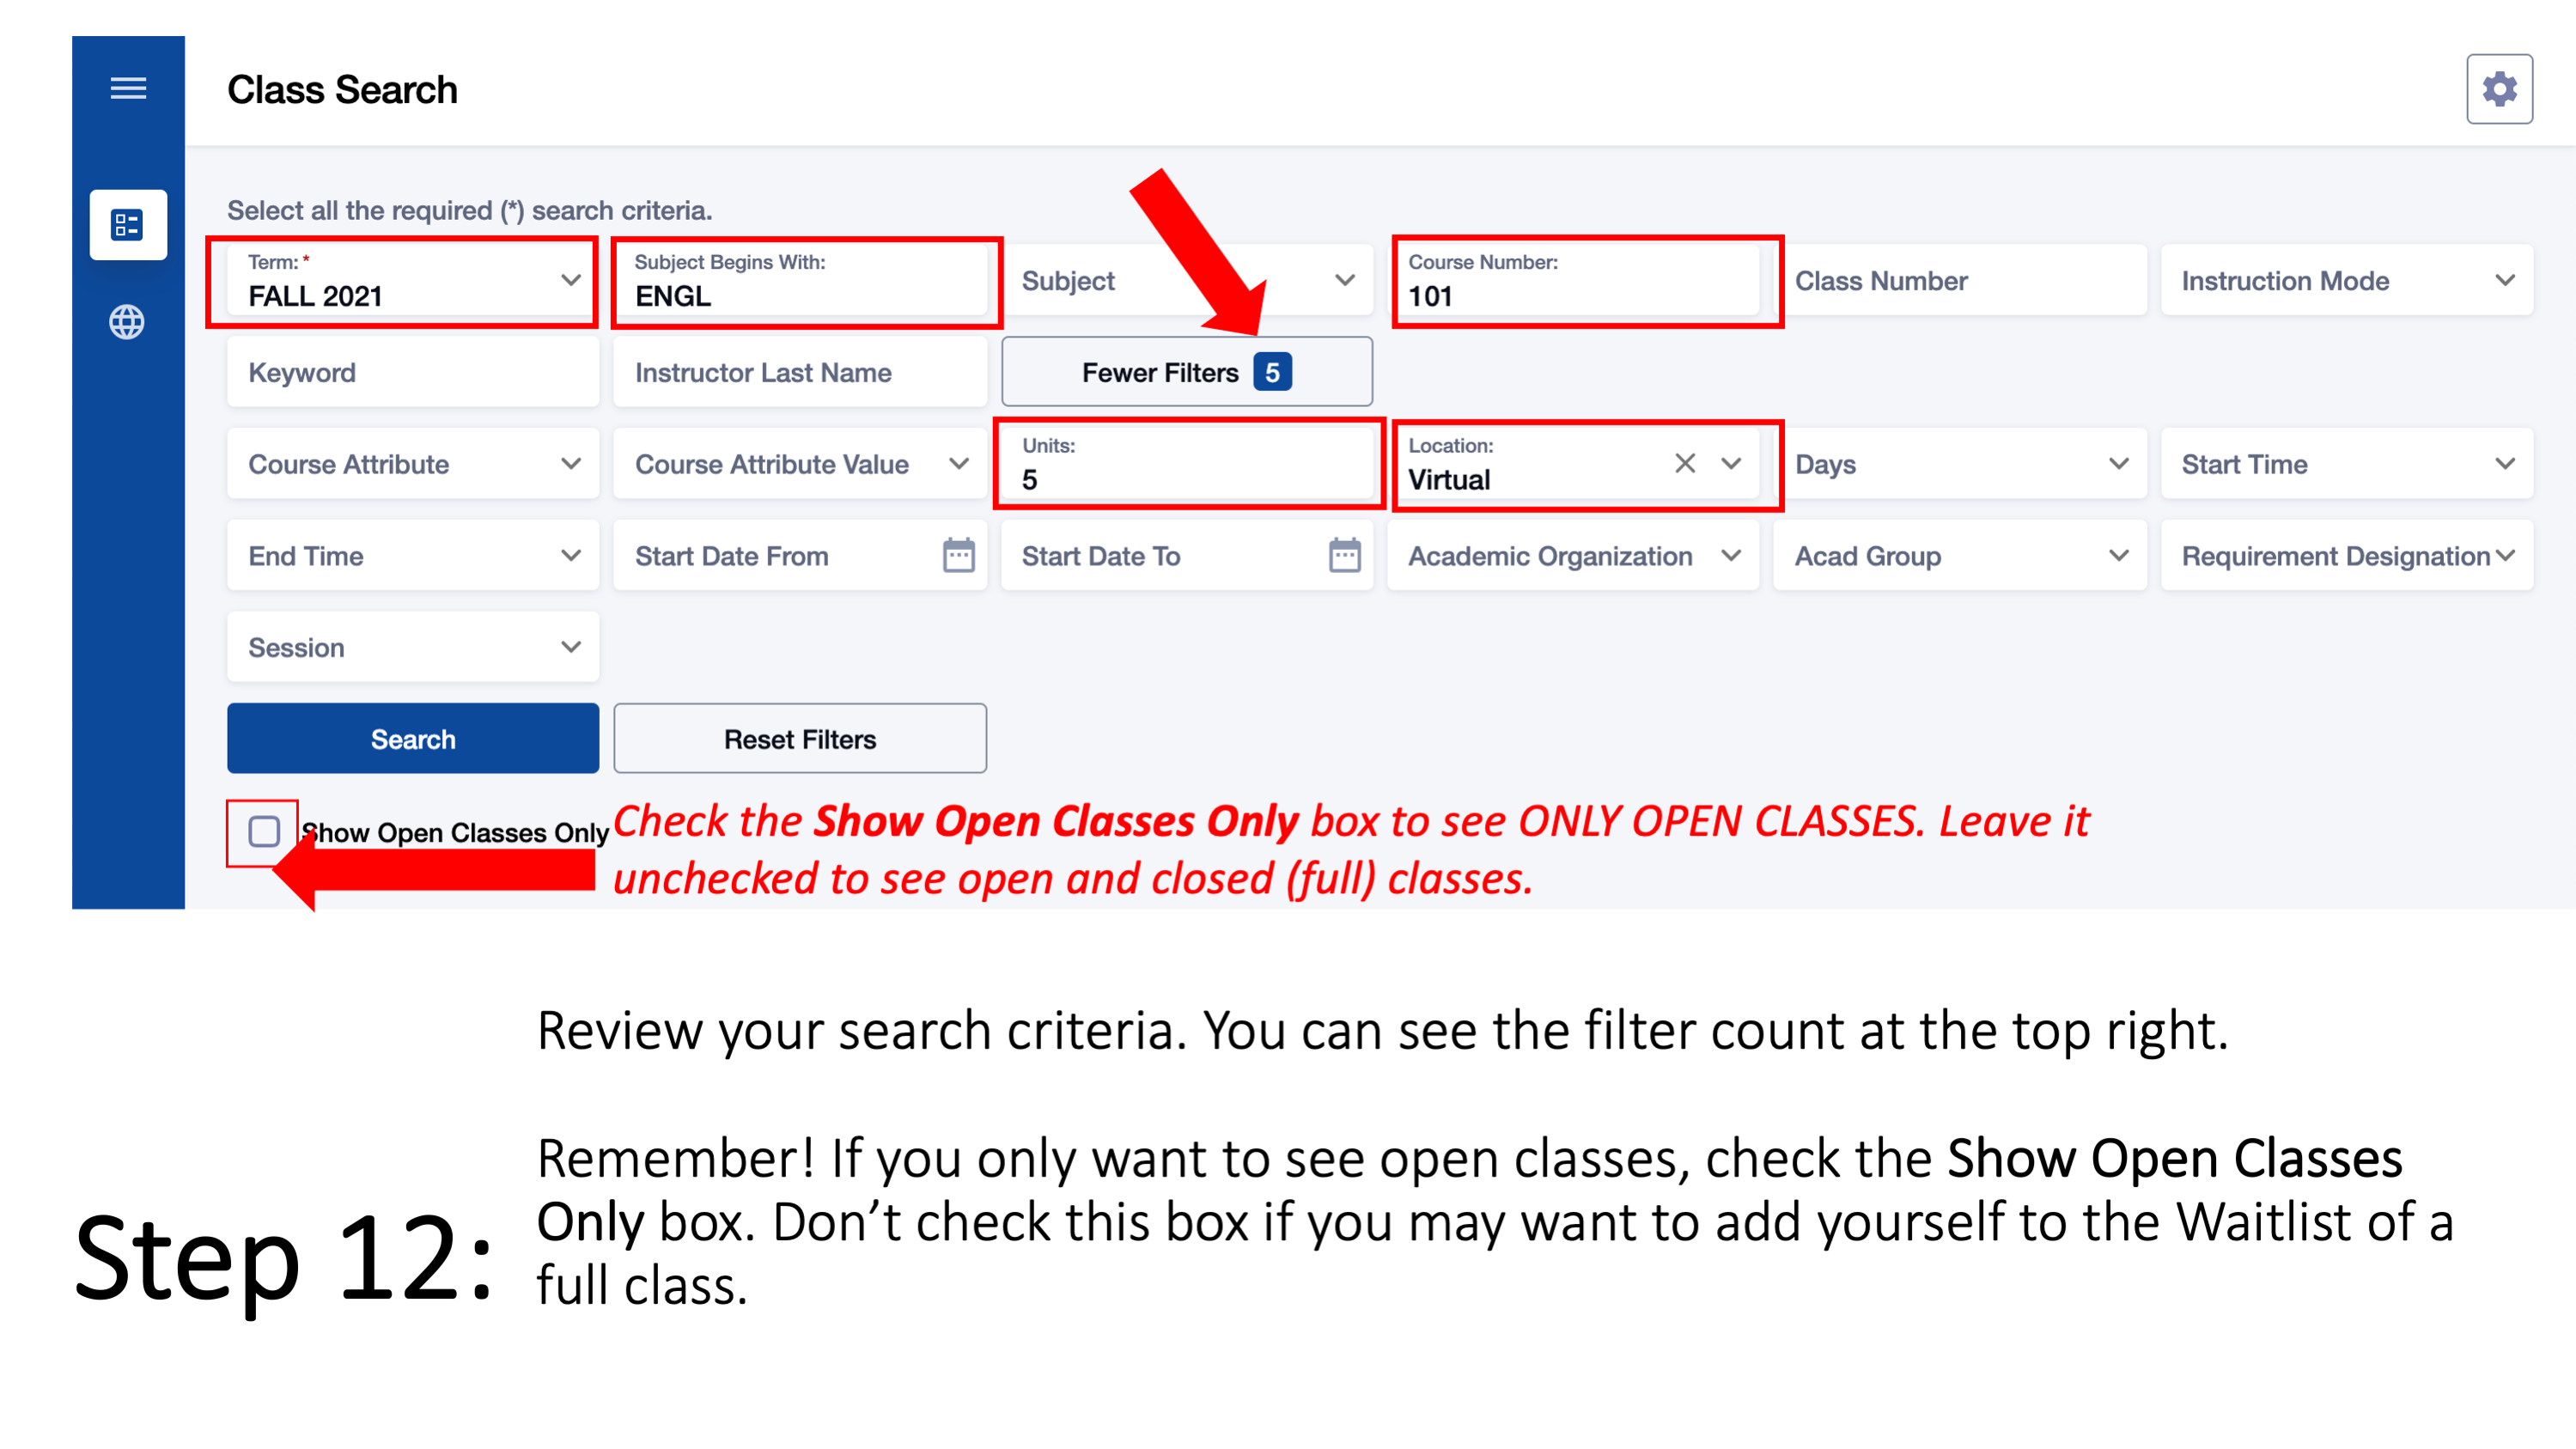 Step 12: Review your search criteria. You can see the filter count at the top right. Remember! If you only want to see open classes, check the Show Open Classes Only box. Don’t check this box if you may want to add yourself to the Waitlist of a full class.